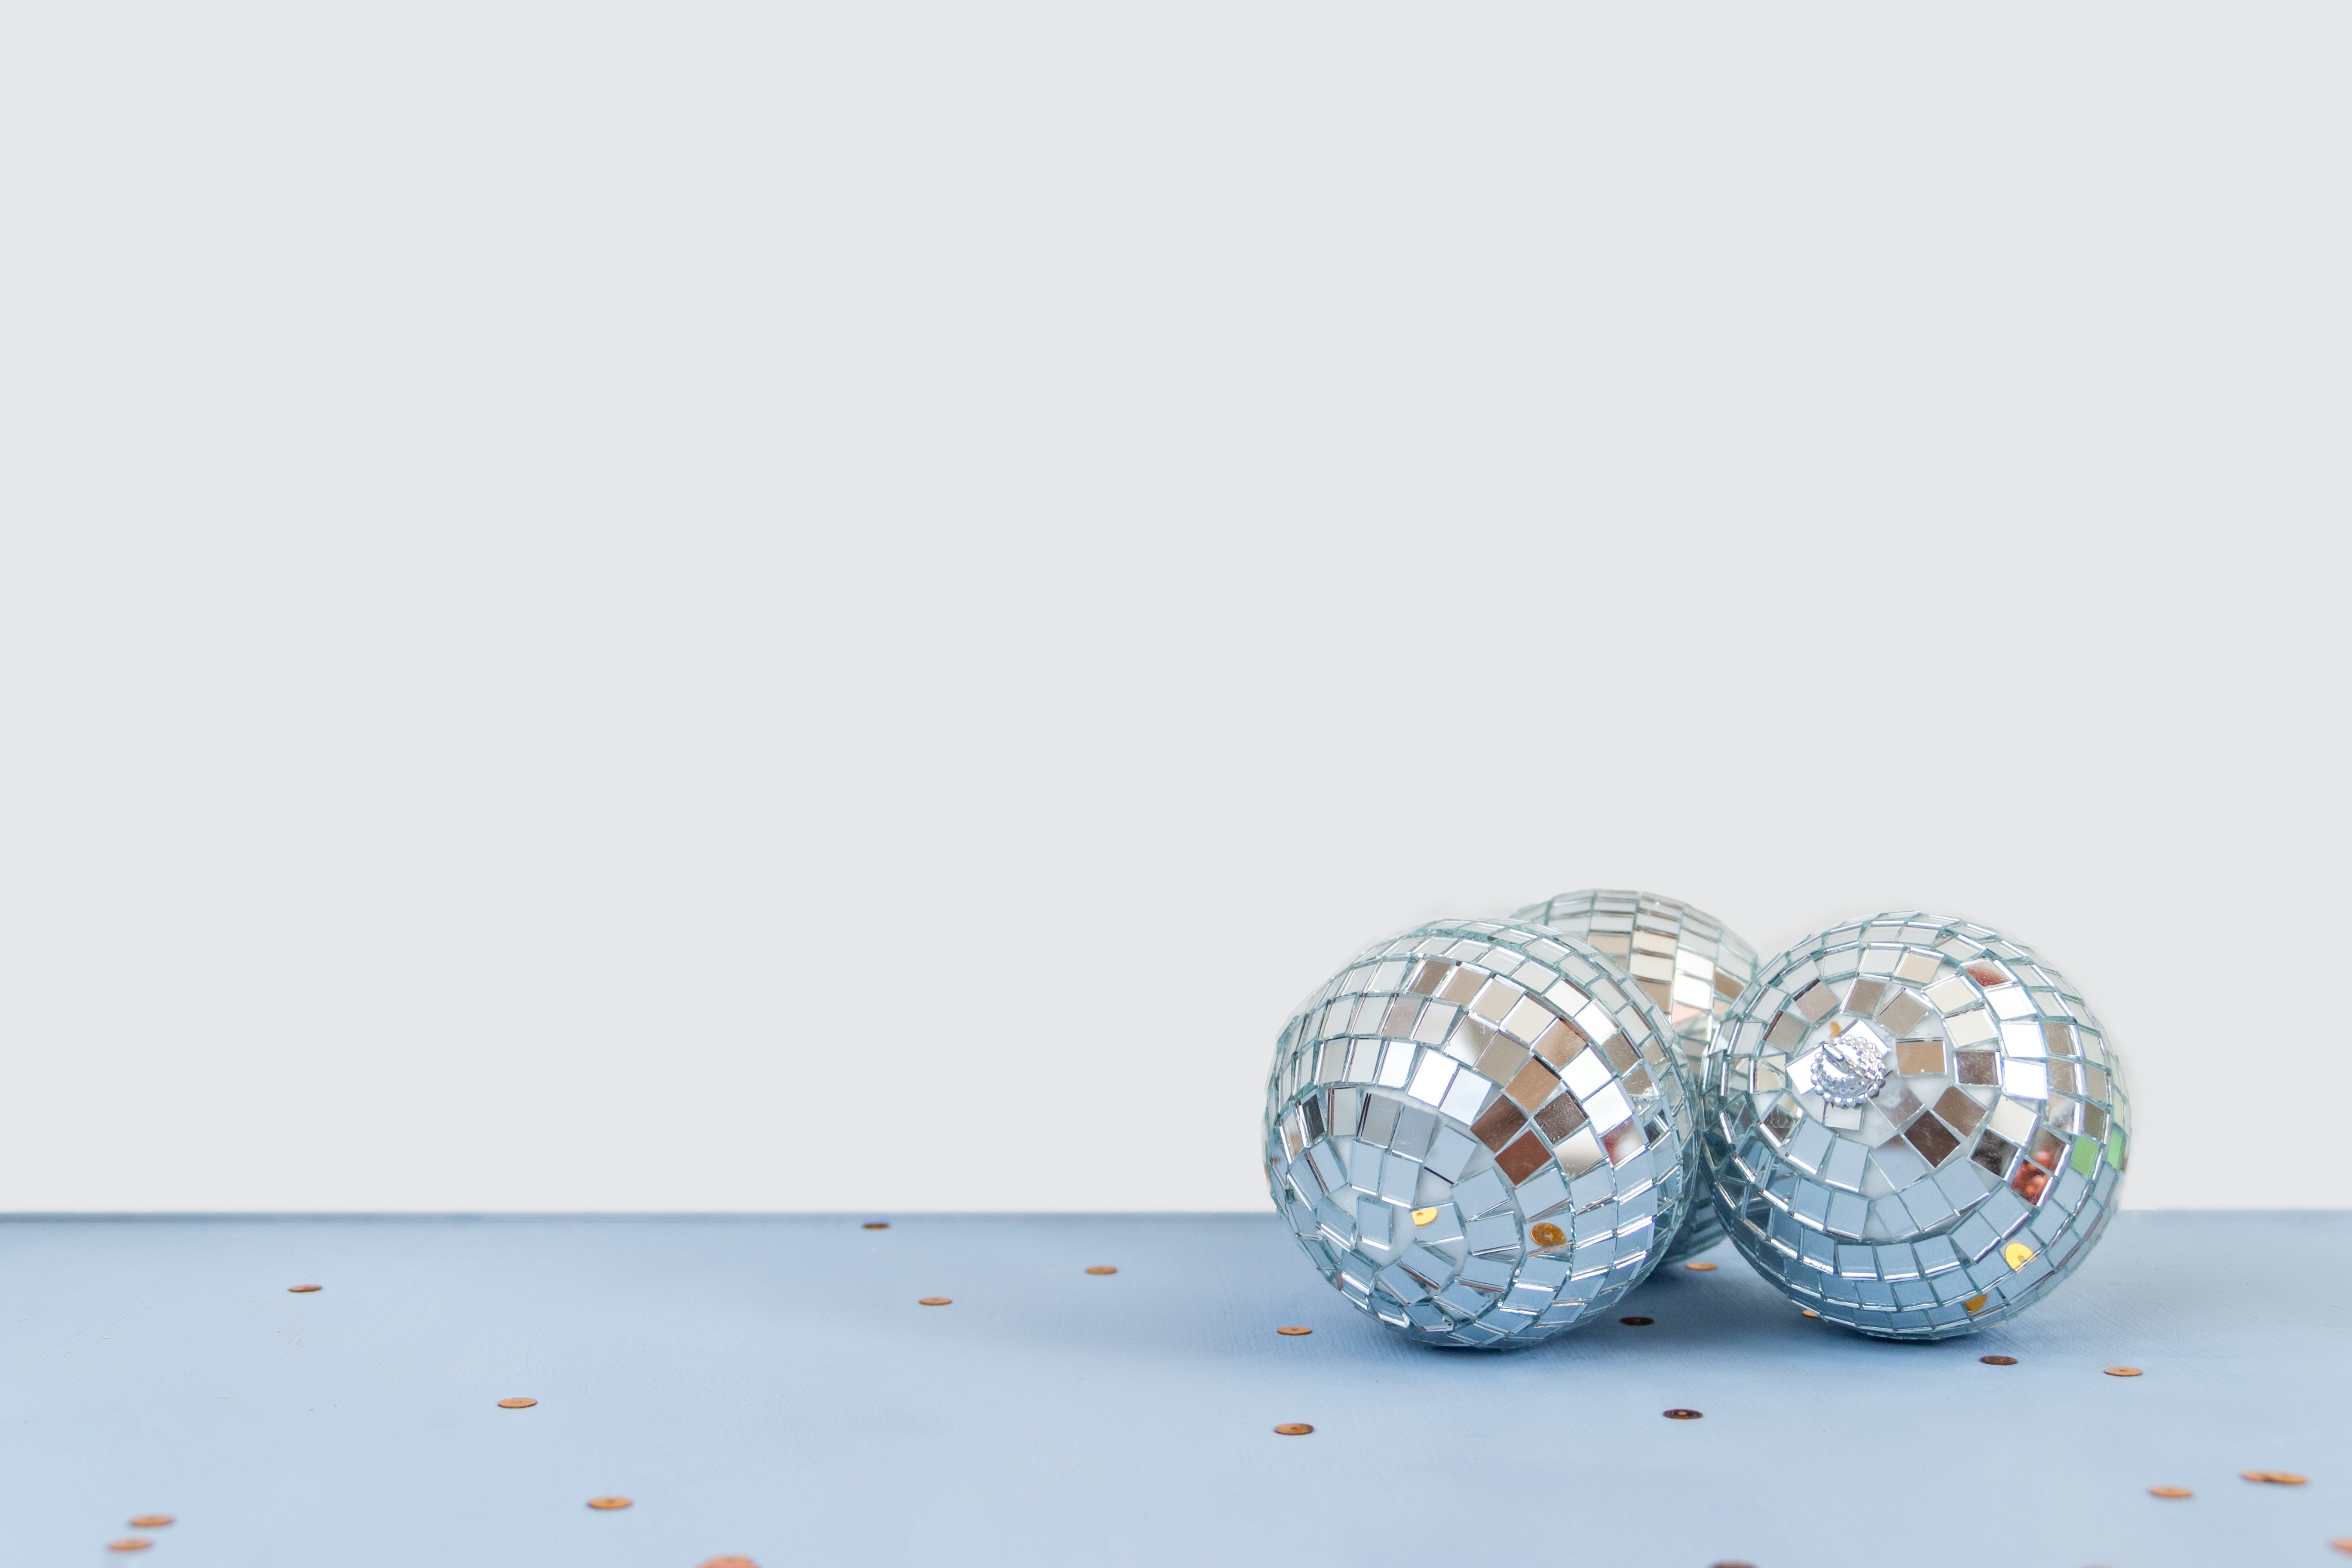 Image of three disco balls gathered together on a light blue floor against a white background